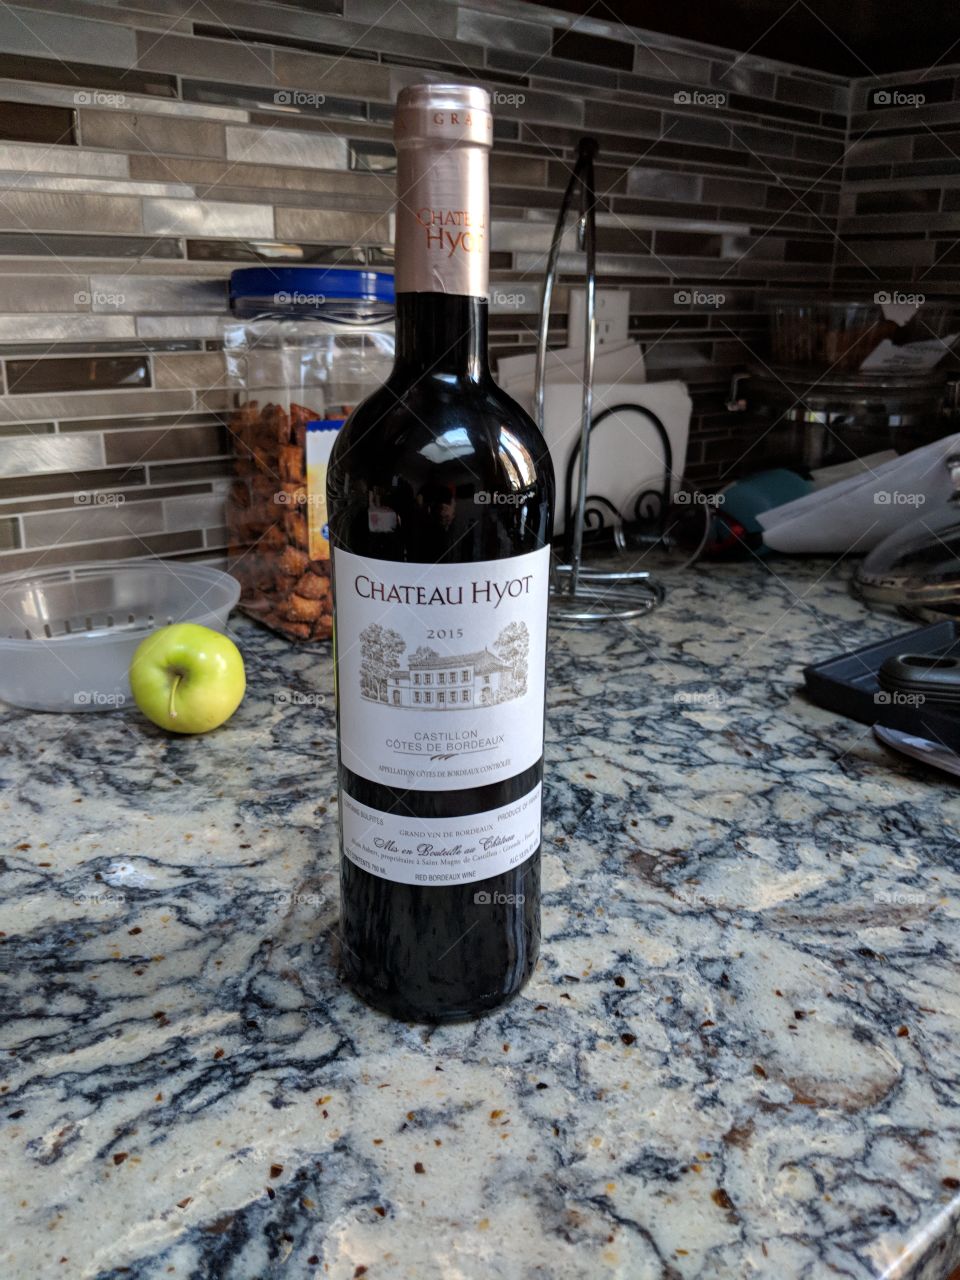 Bottle of wine on counter